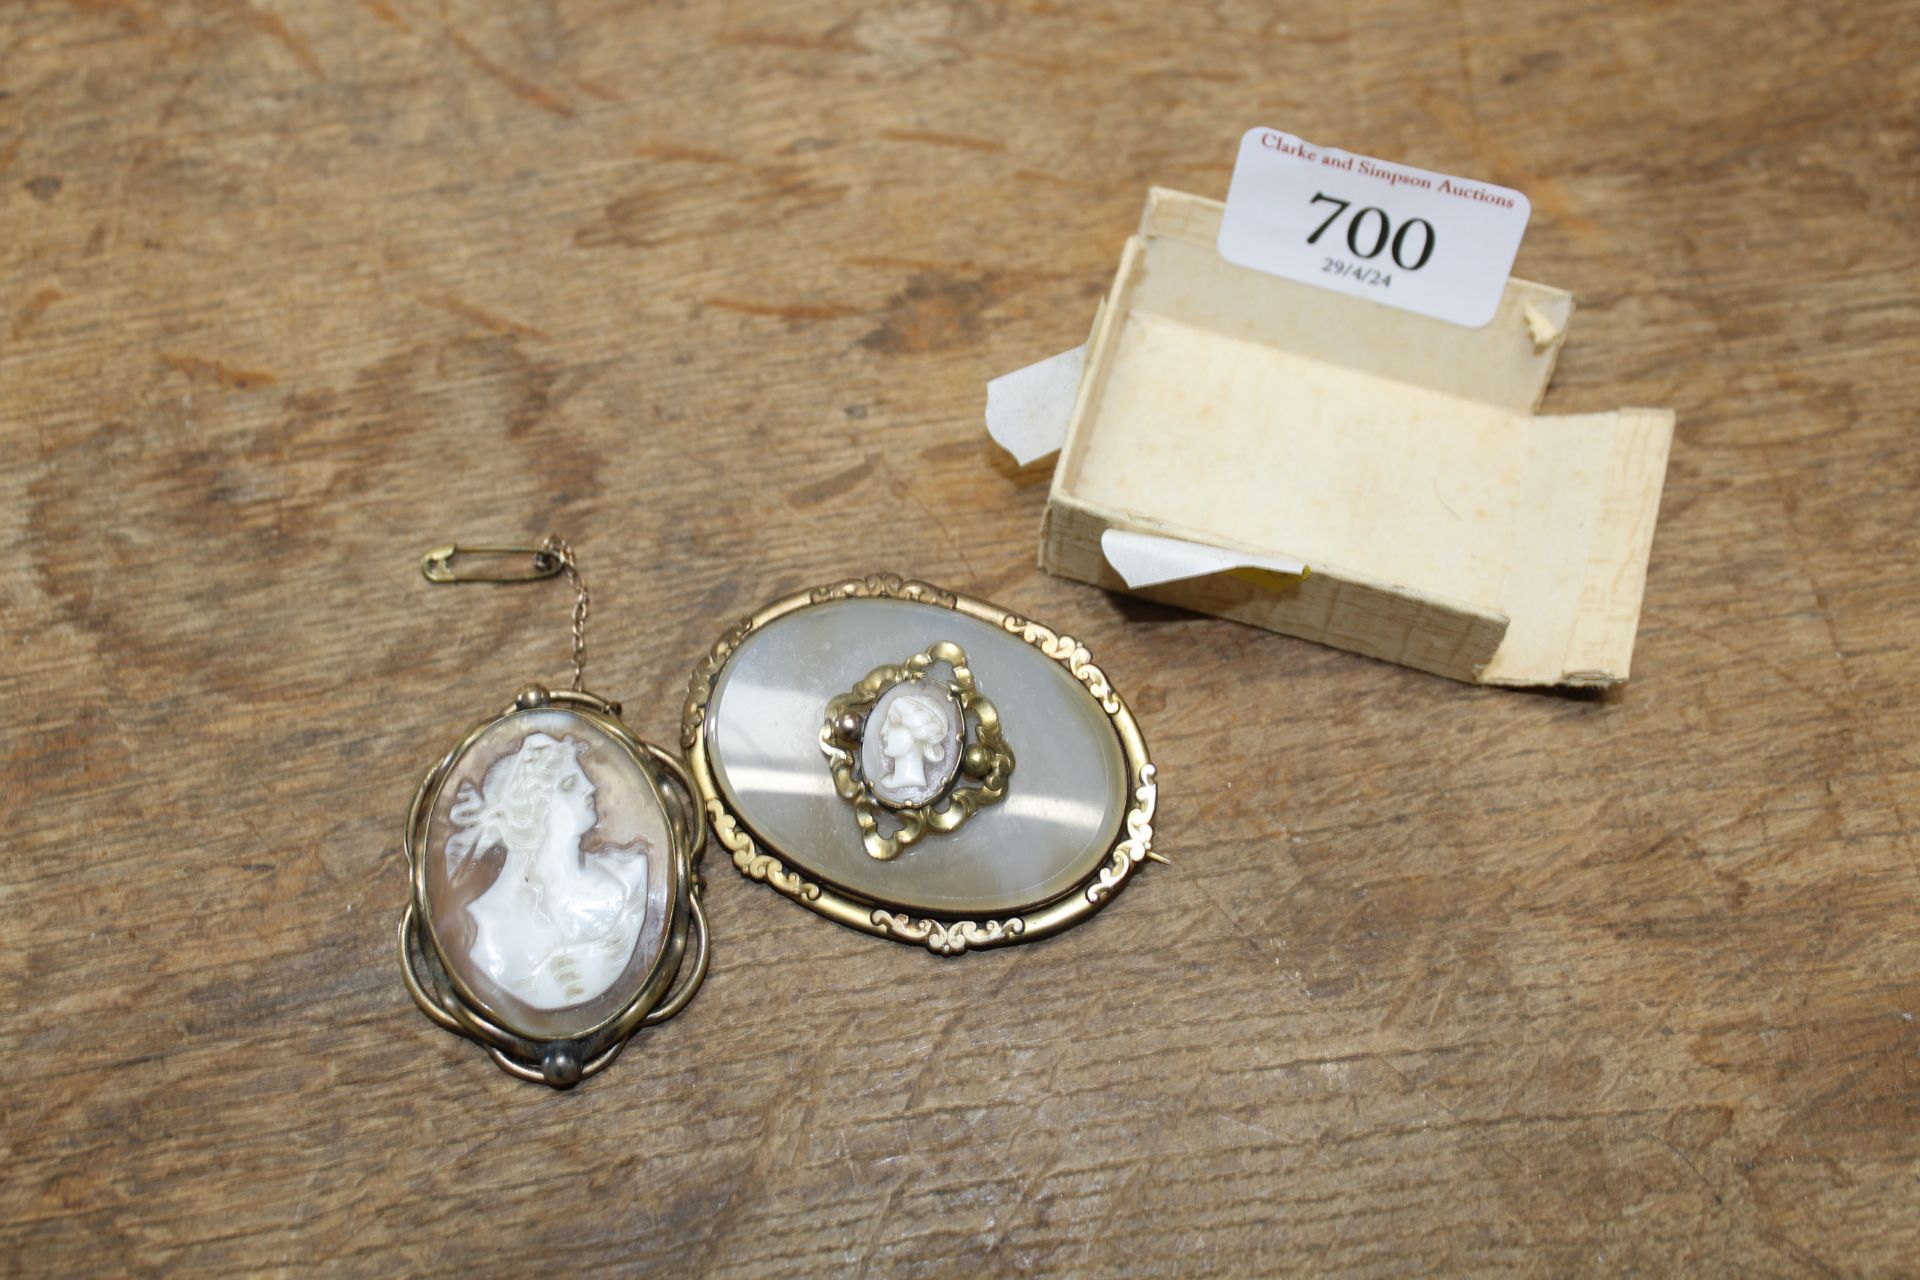 Two cameo brooches